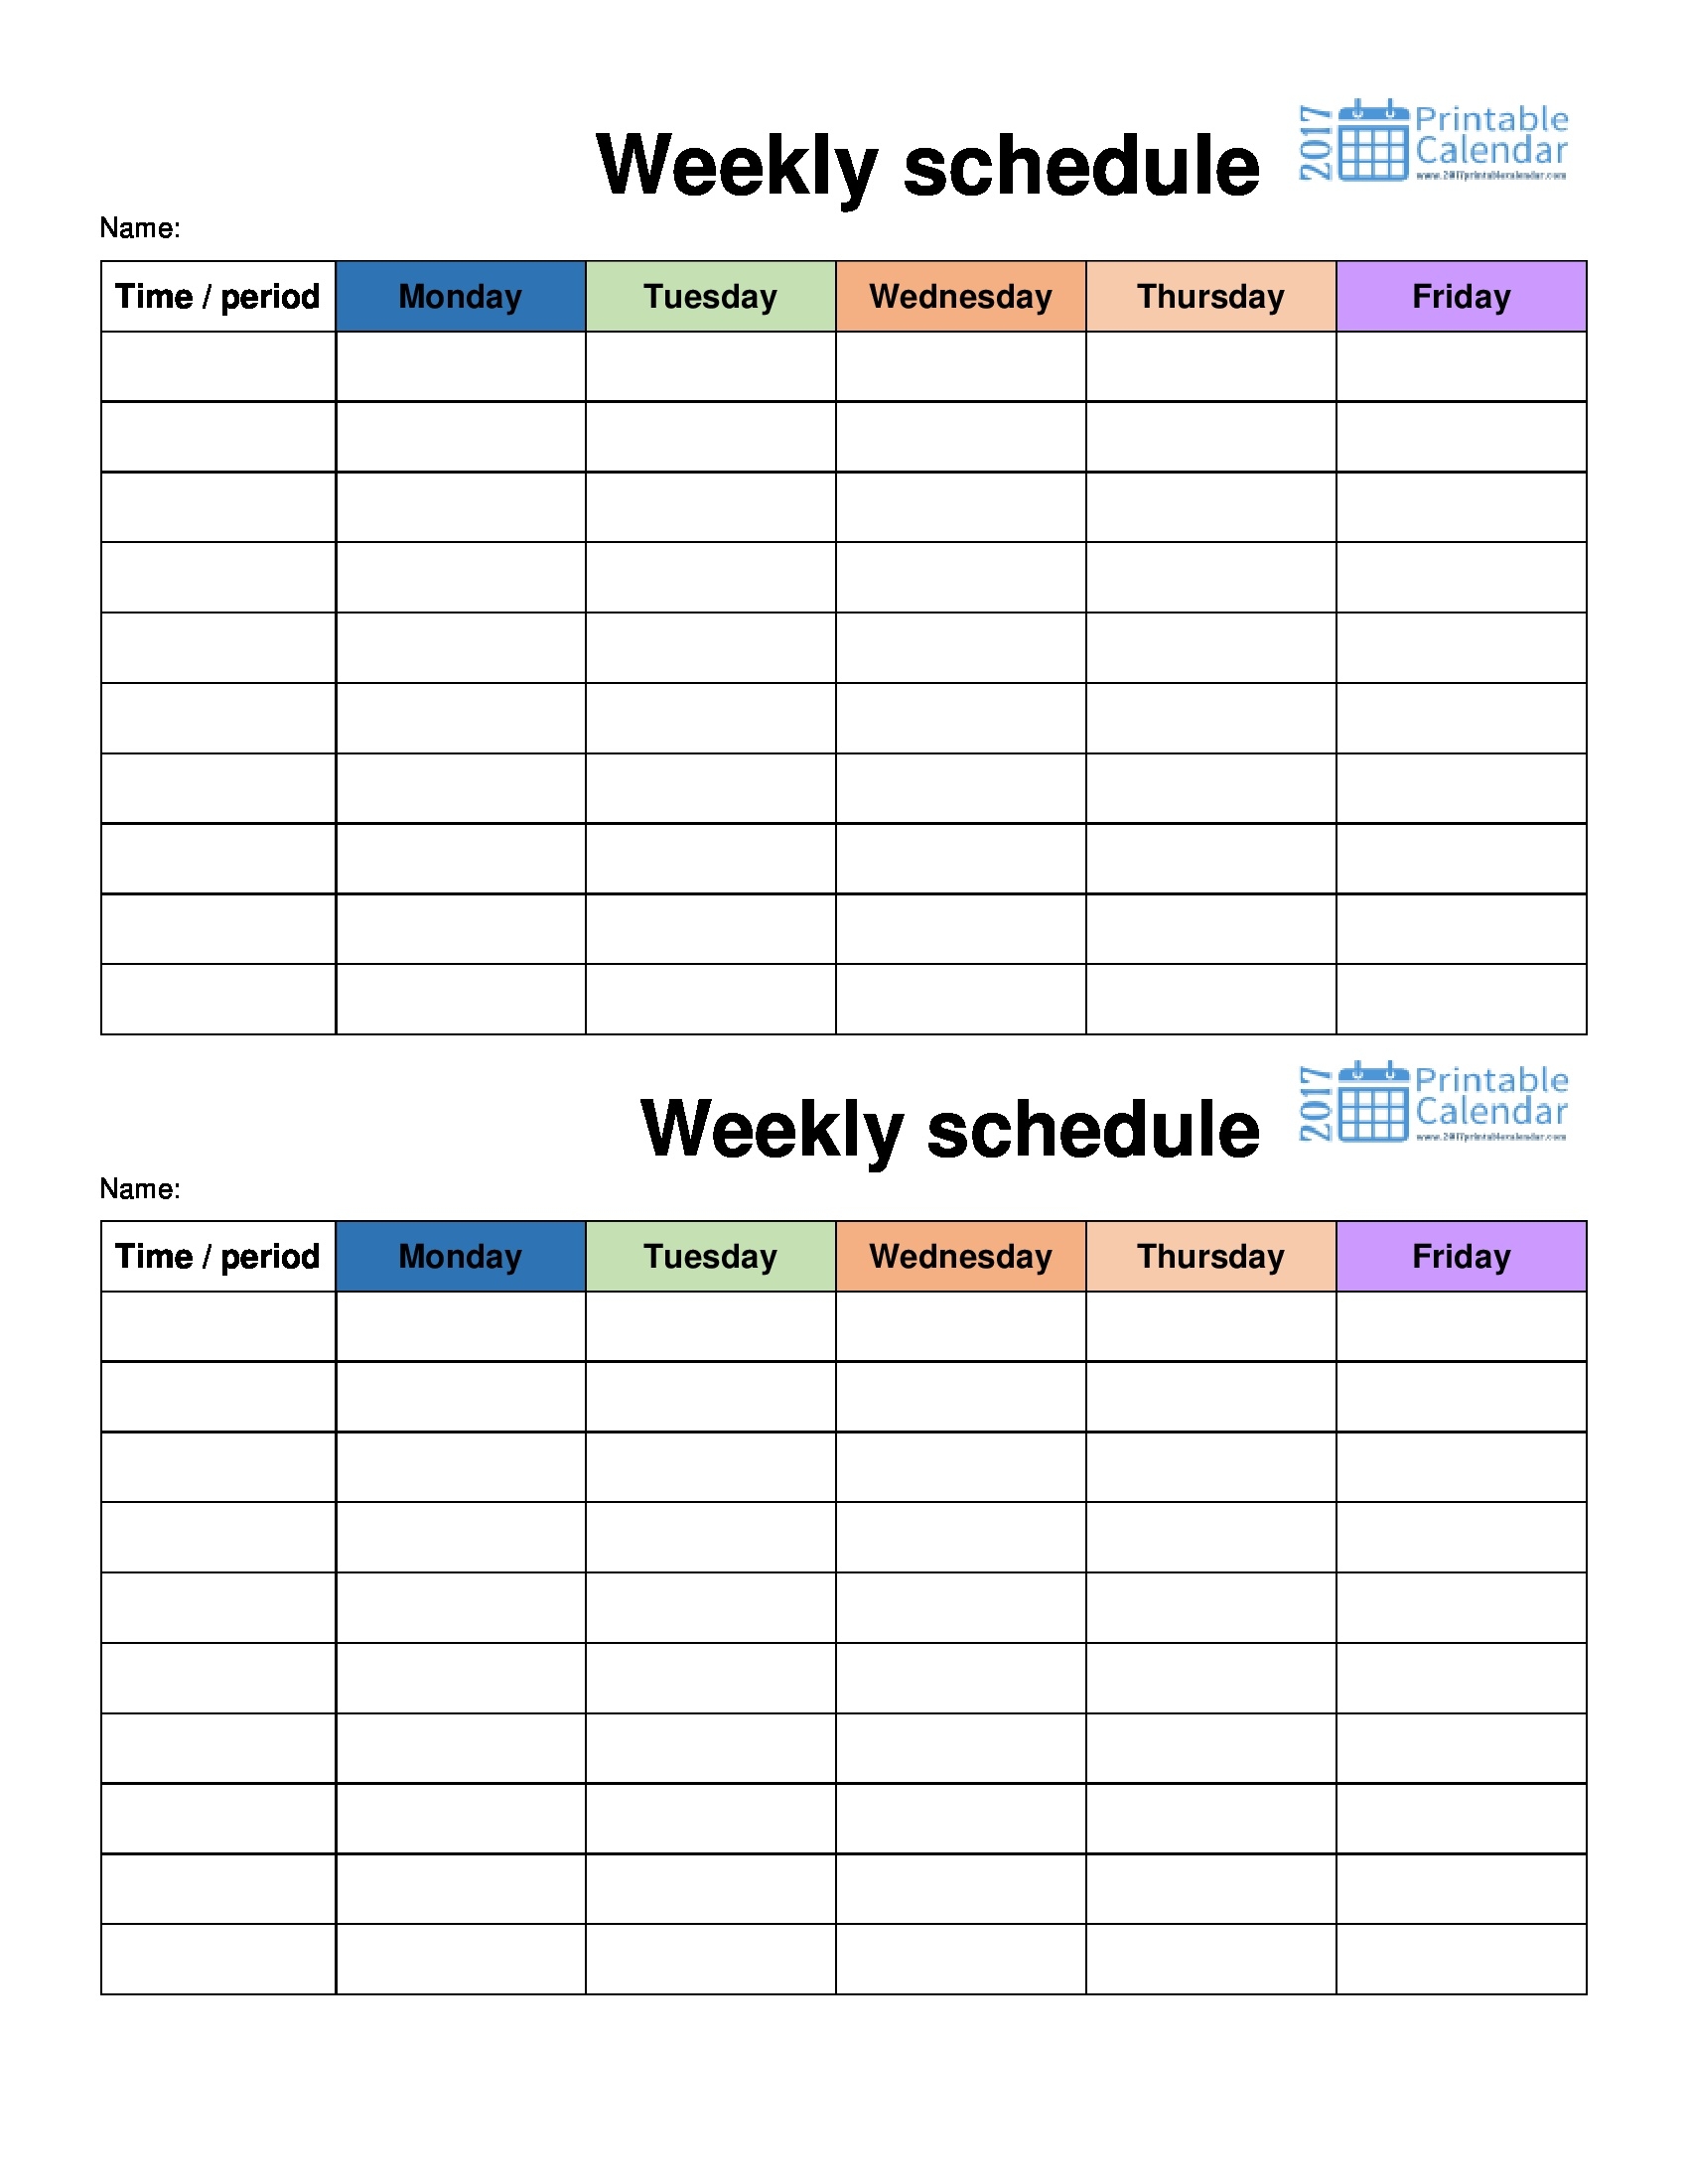 Template For A Weekly Schedule - Shefftunes.tk  Monday Though Friday Timed Schedule